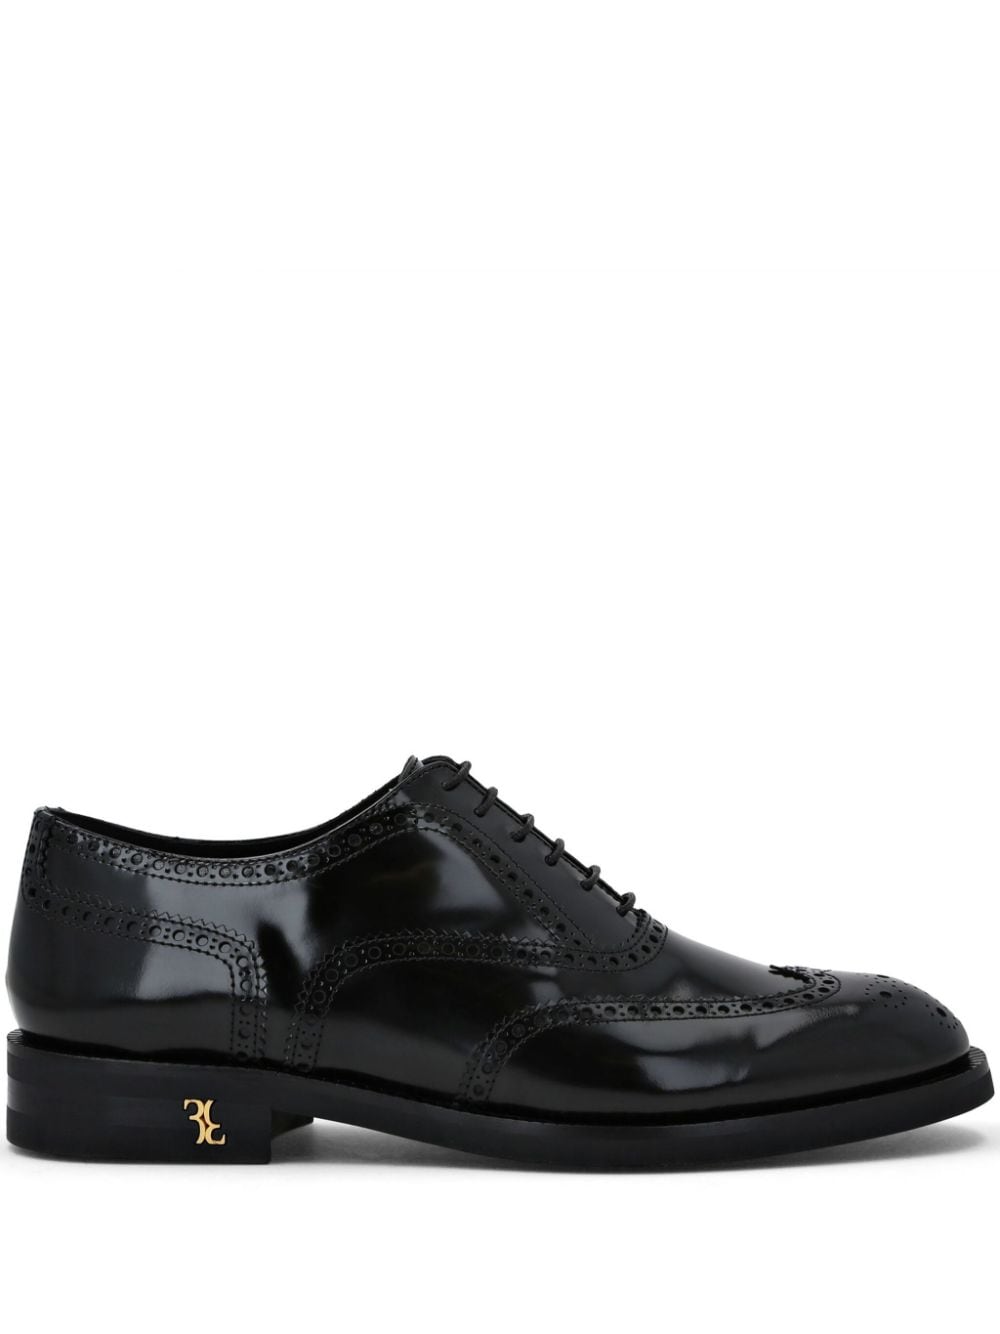 patent-finish leather oxford shoes